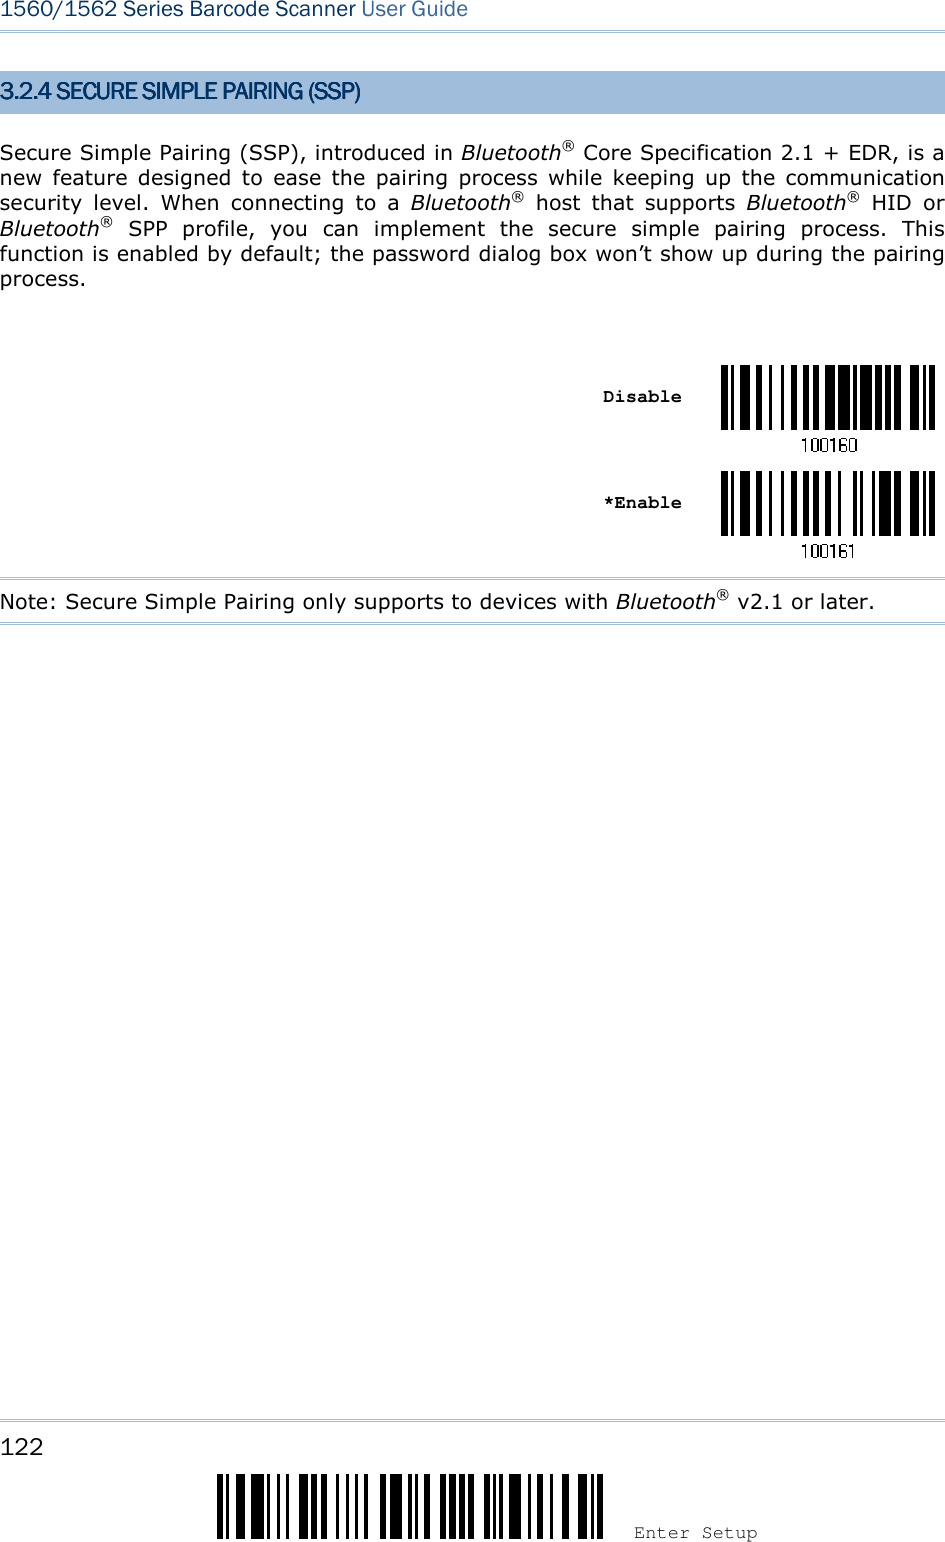 122 Enter Setup 1560/1562 Series Barcode Scanner User Guide  3.2.4 SECURE SIMPLE 3.2.4 SECURE SIMPLE 3.2.4 SECURE SIMPLE 3.2.4 SECURE SIMPLE PAIRING (SSP)PAIRING (SSP)PAIRING (SSP)PAIRING (SSP)    Secure Simple Pairing (SSP), introduced in Bluetooth® Core Specification 2.1 + EDR, is a new  feature  designed  to  ease  the  pairing  process  while  keeping  up  the  communication security  level.  When  connecting  to  a  Bluetooth®  host  that  supports  Bluetooth®  HID  or Bluetooth®  SPP  profile,  you  can  implement  the  secure  simple  pairing  process.  This function is enabled by default; the password dialog box won’t show up during the pairing process.     Disable     *Enable  Note: Secure Simple Pairing only supports to devices with Bluetooth® v2.1 or later.